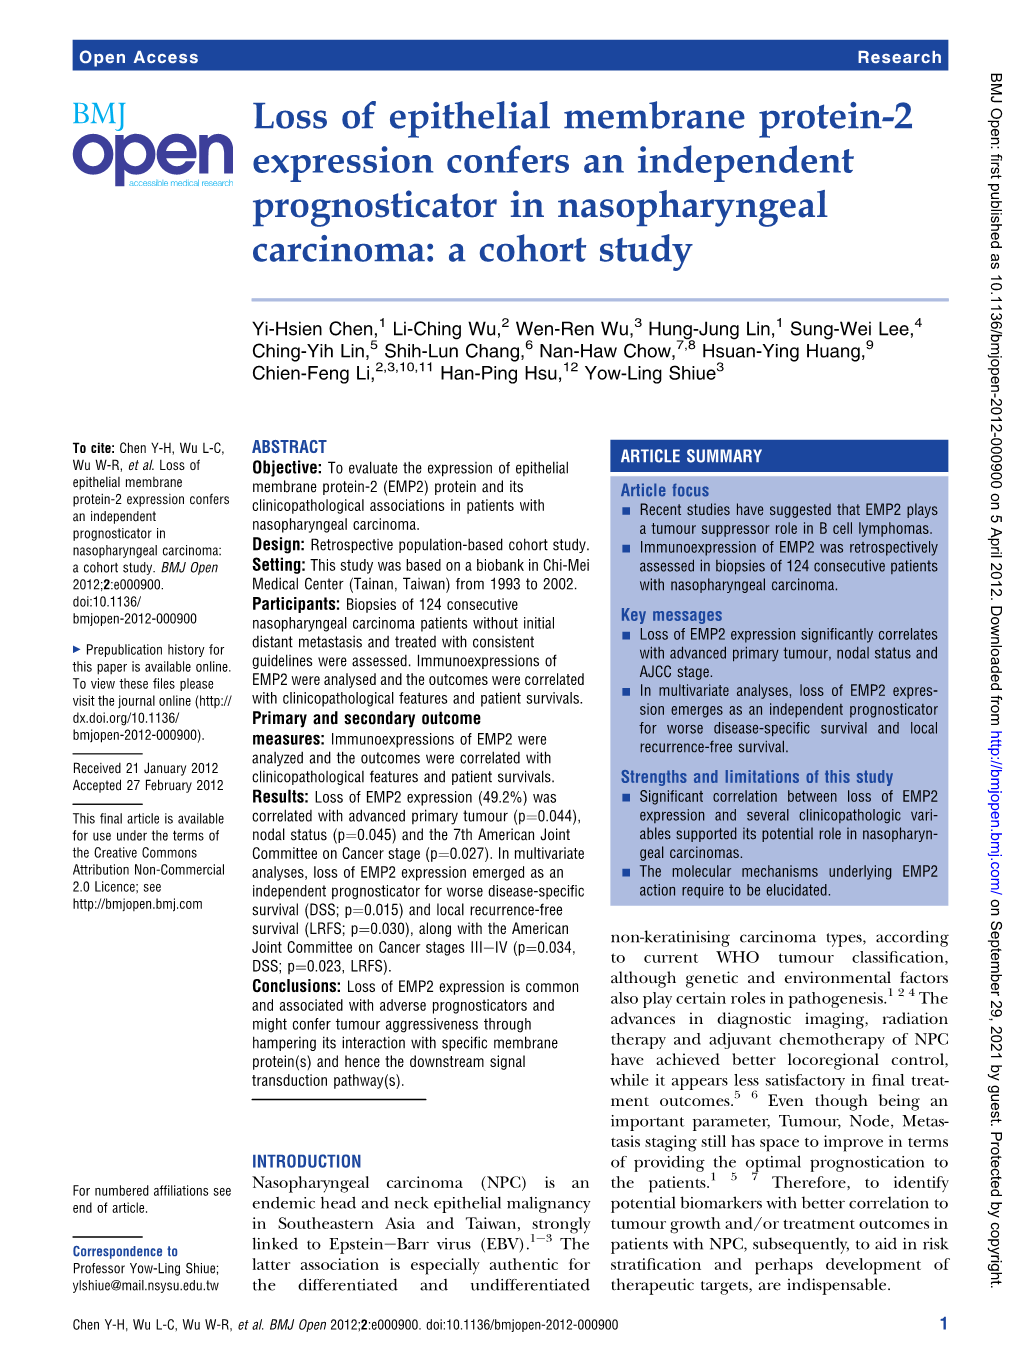 Loss of Epithelial Membrane Protein-2 Expression Confers an Independent Prognosticator in Nasopharyngeal Carcinoma: a Cohort Study